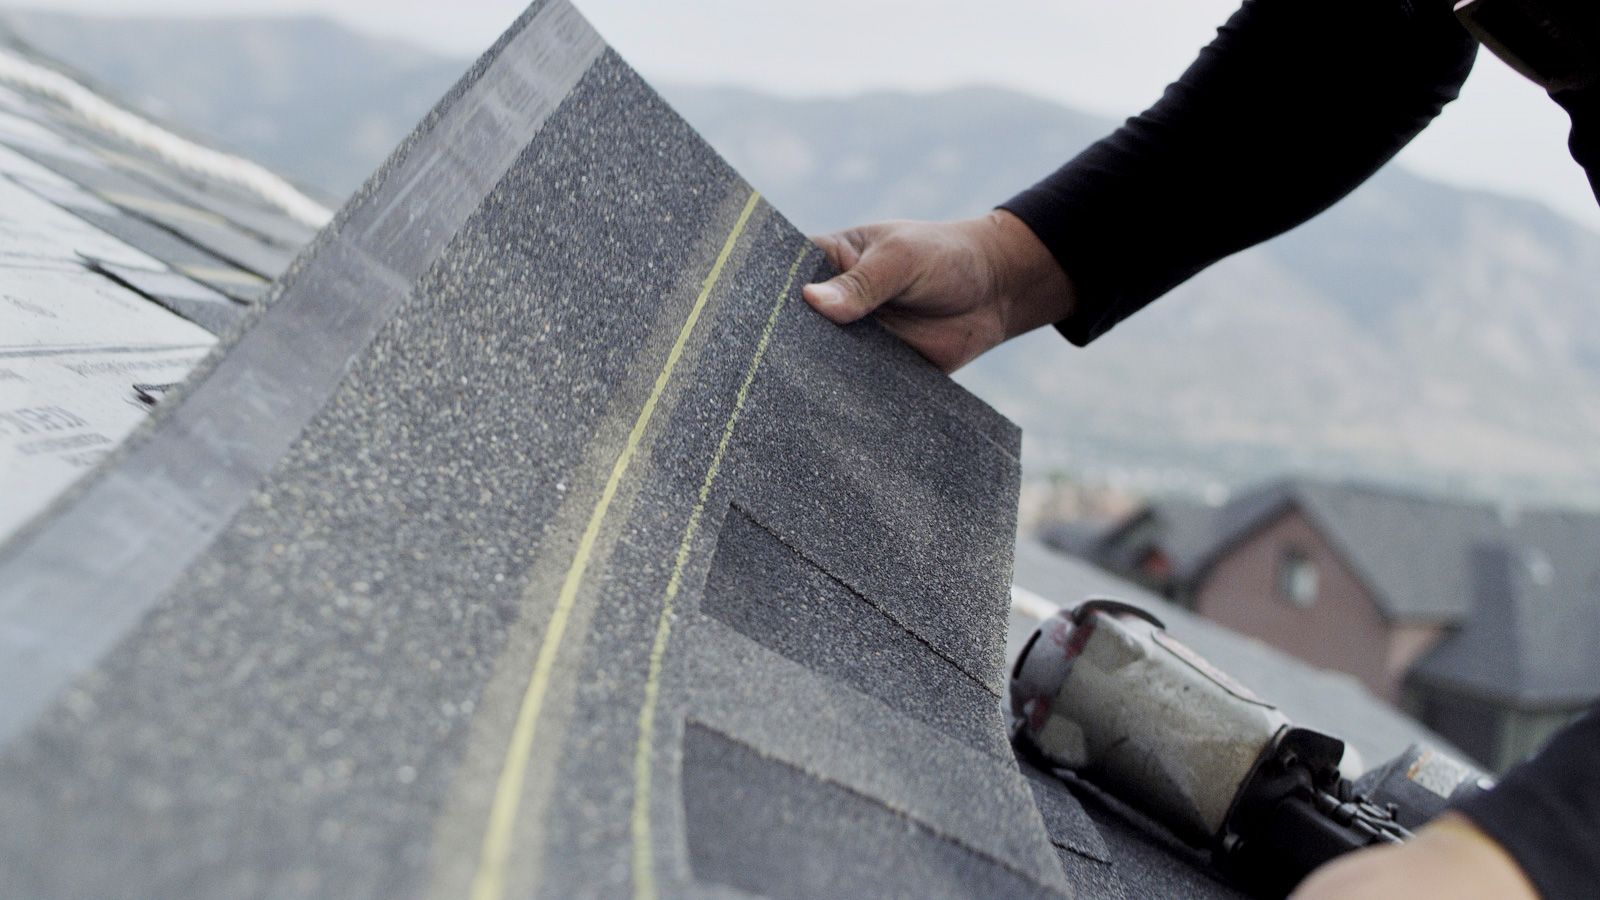 Learn What Are The Nail Sizes For Different Types of Roofing